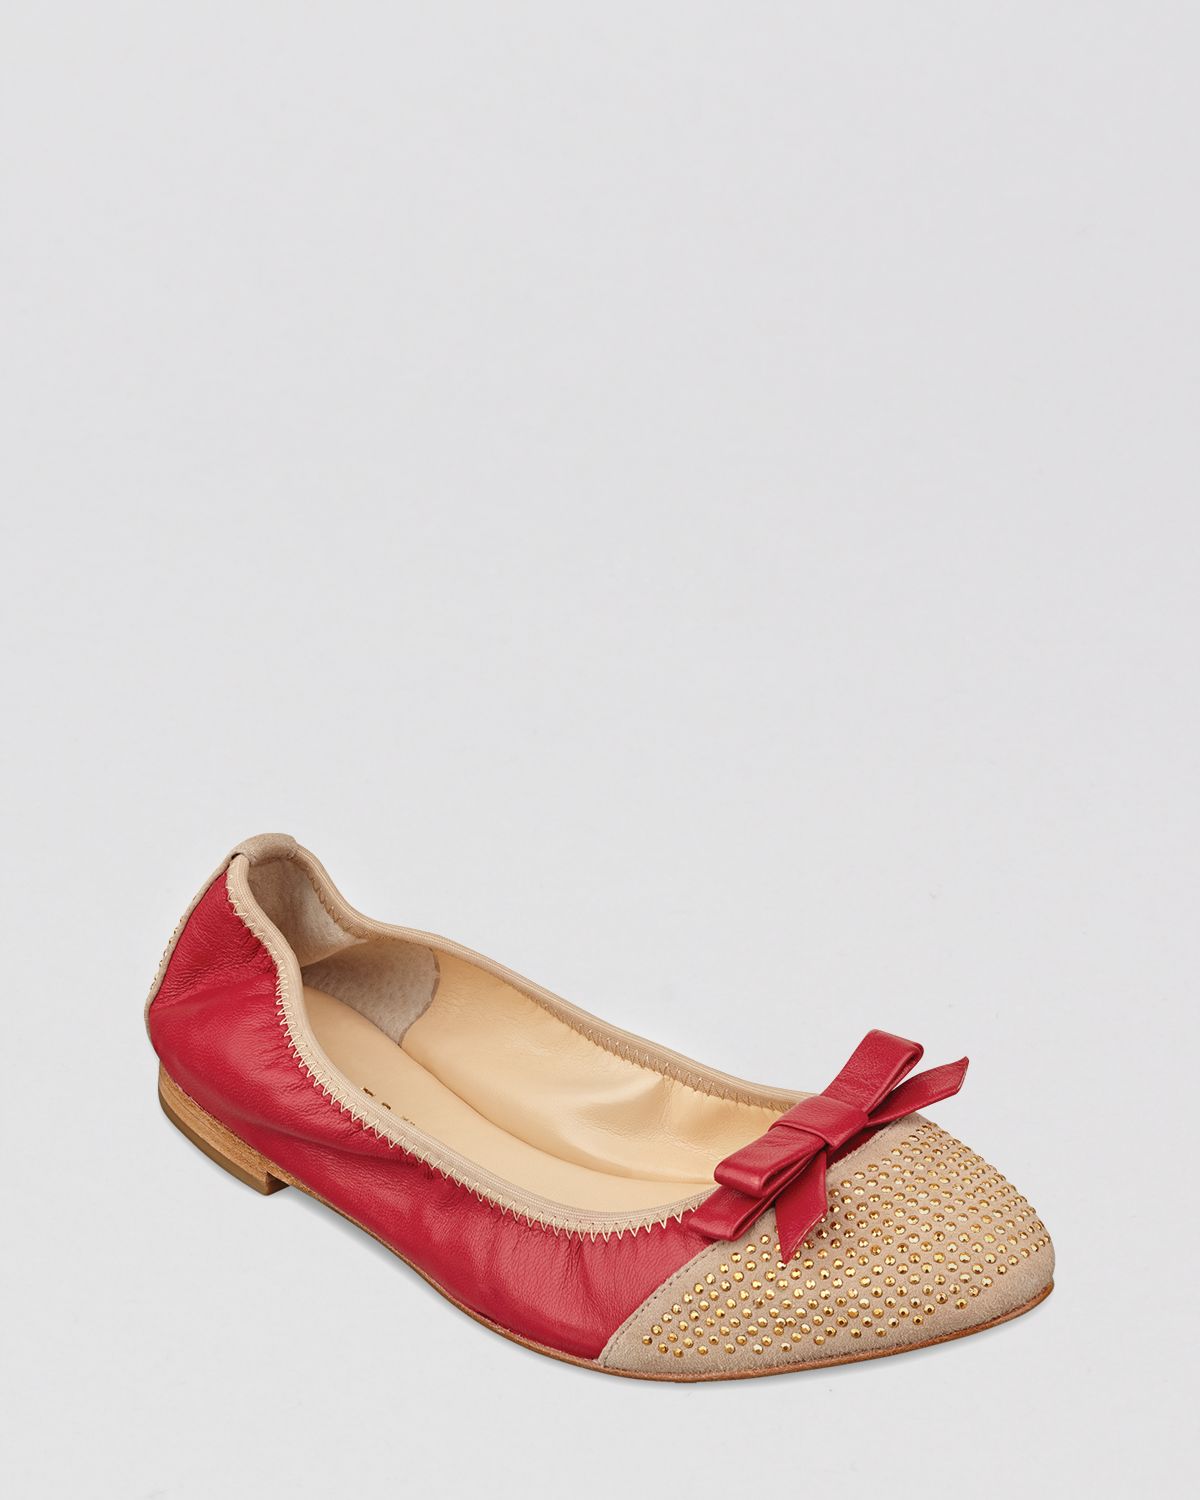 Ivanka Trump Ballet Flats Lori Two Tone Bow in Beige (Red/Nomad) | Lyst